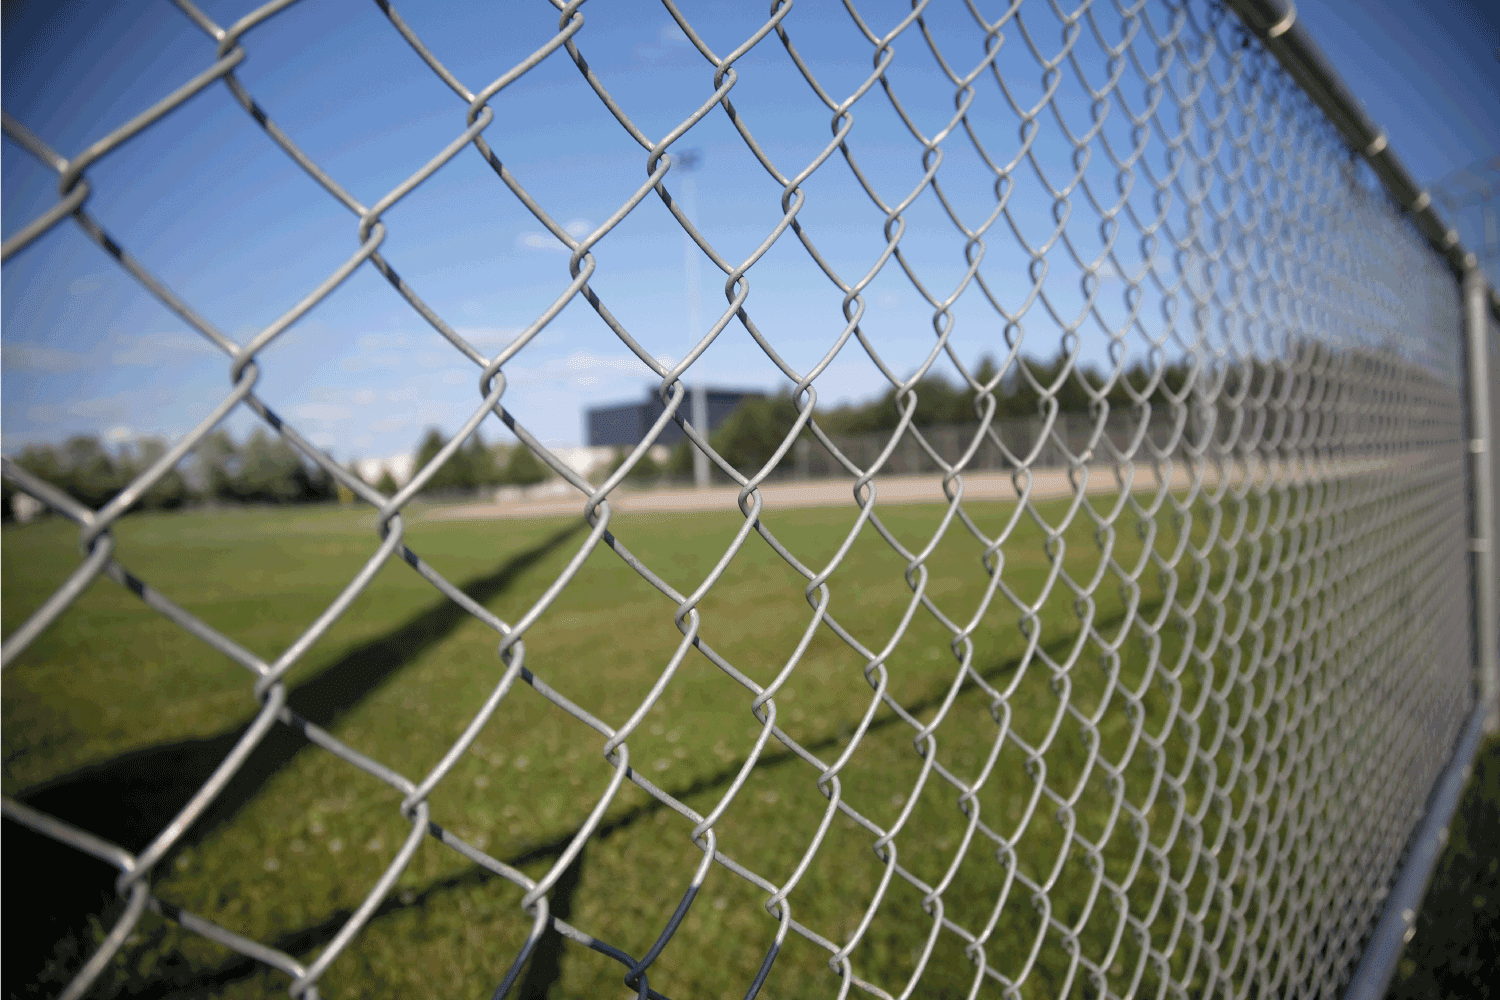 A picture of a chainlink fence on the side of a baseball field